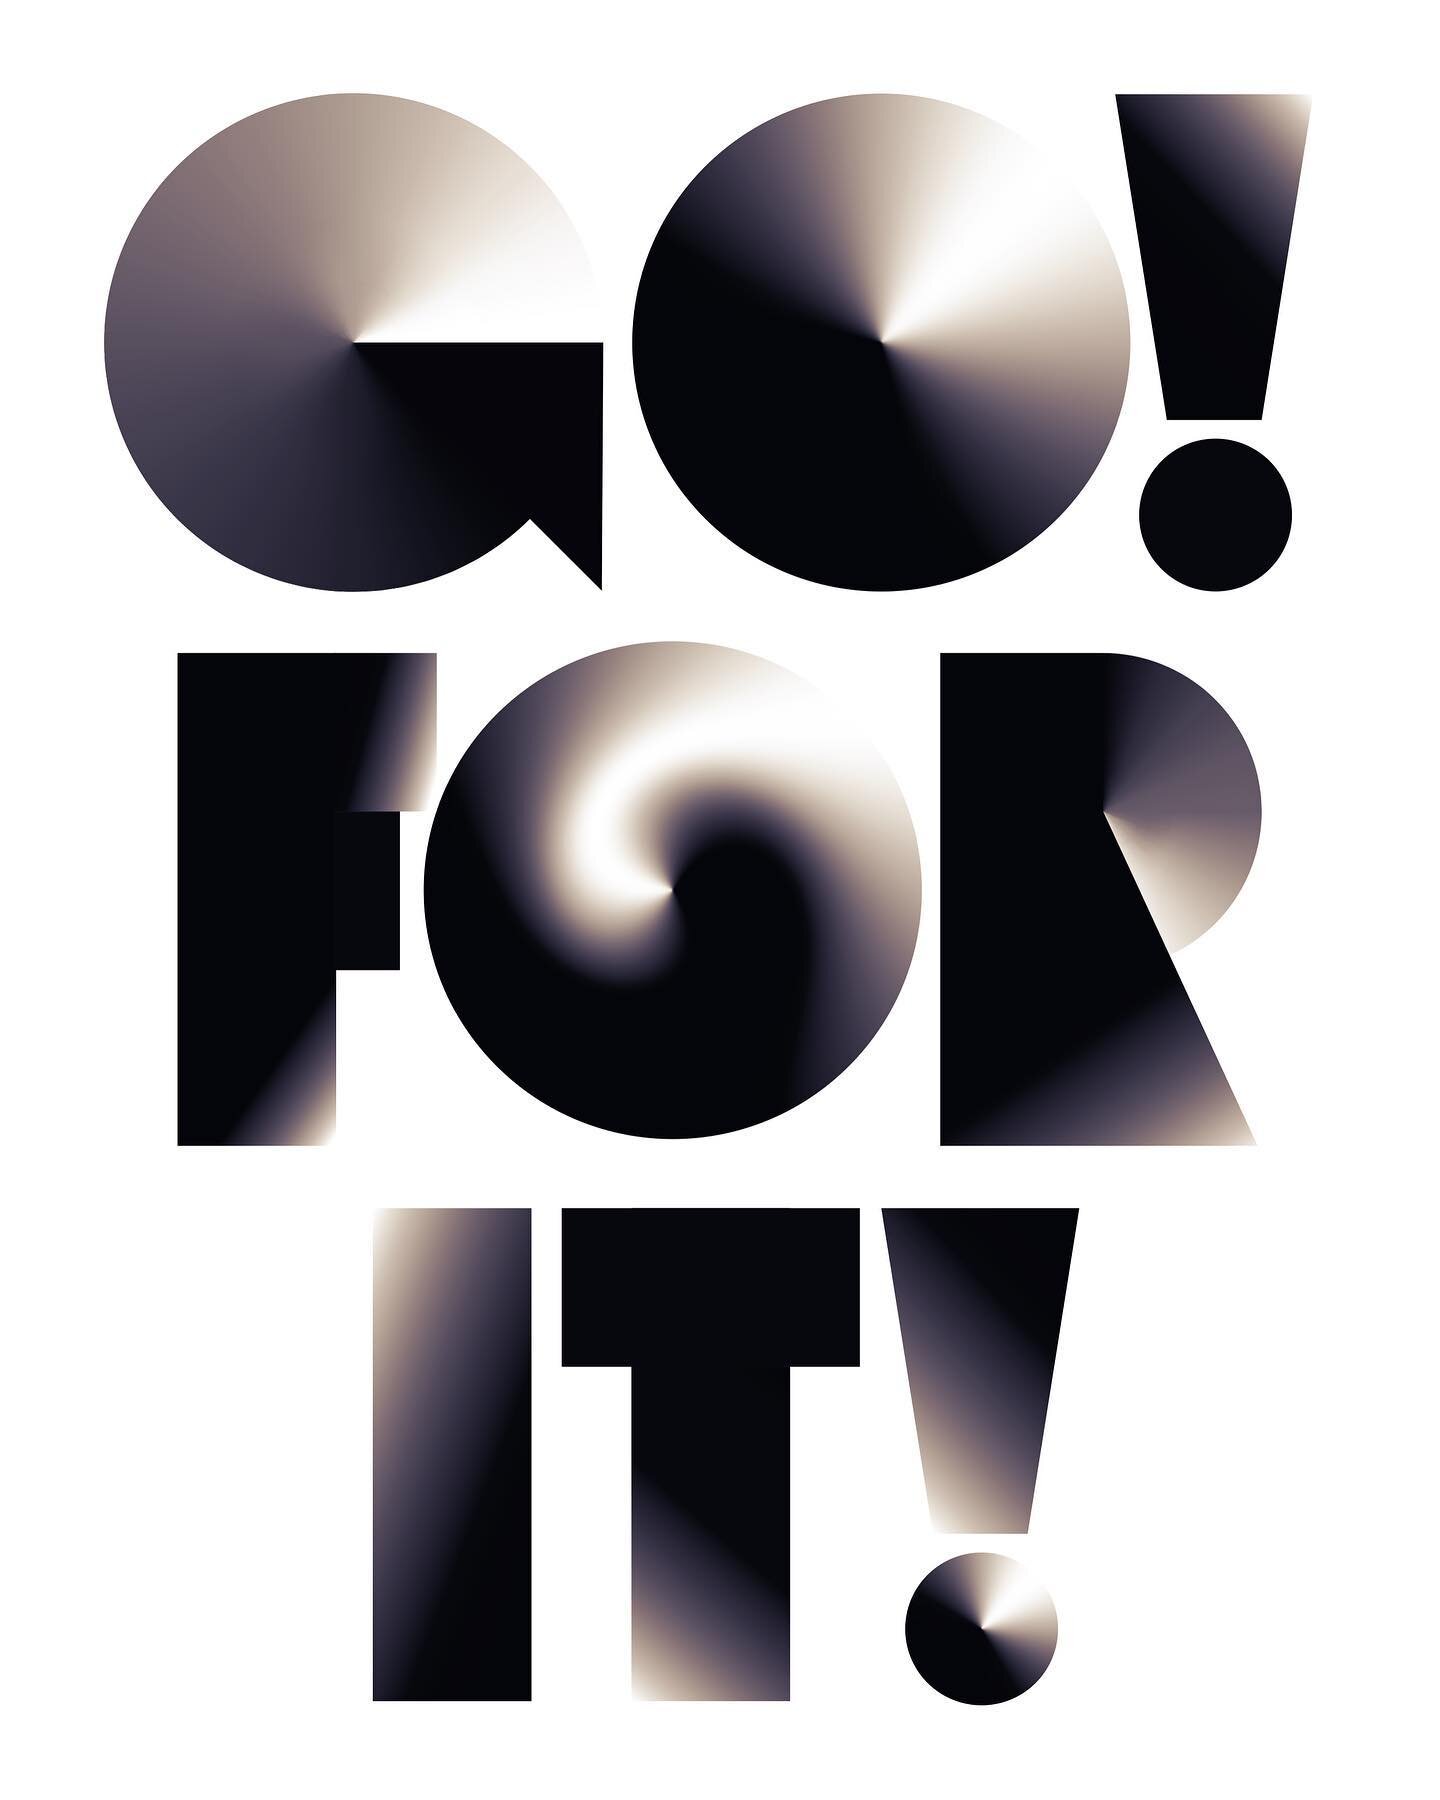 From the archive [TYPOGRAPHY EXPLORATION] Go for it! 🏃🏃 #sergidelgado #lettering #typography #graphicdesign